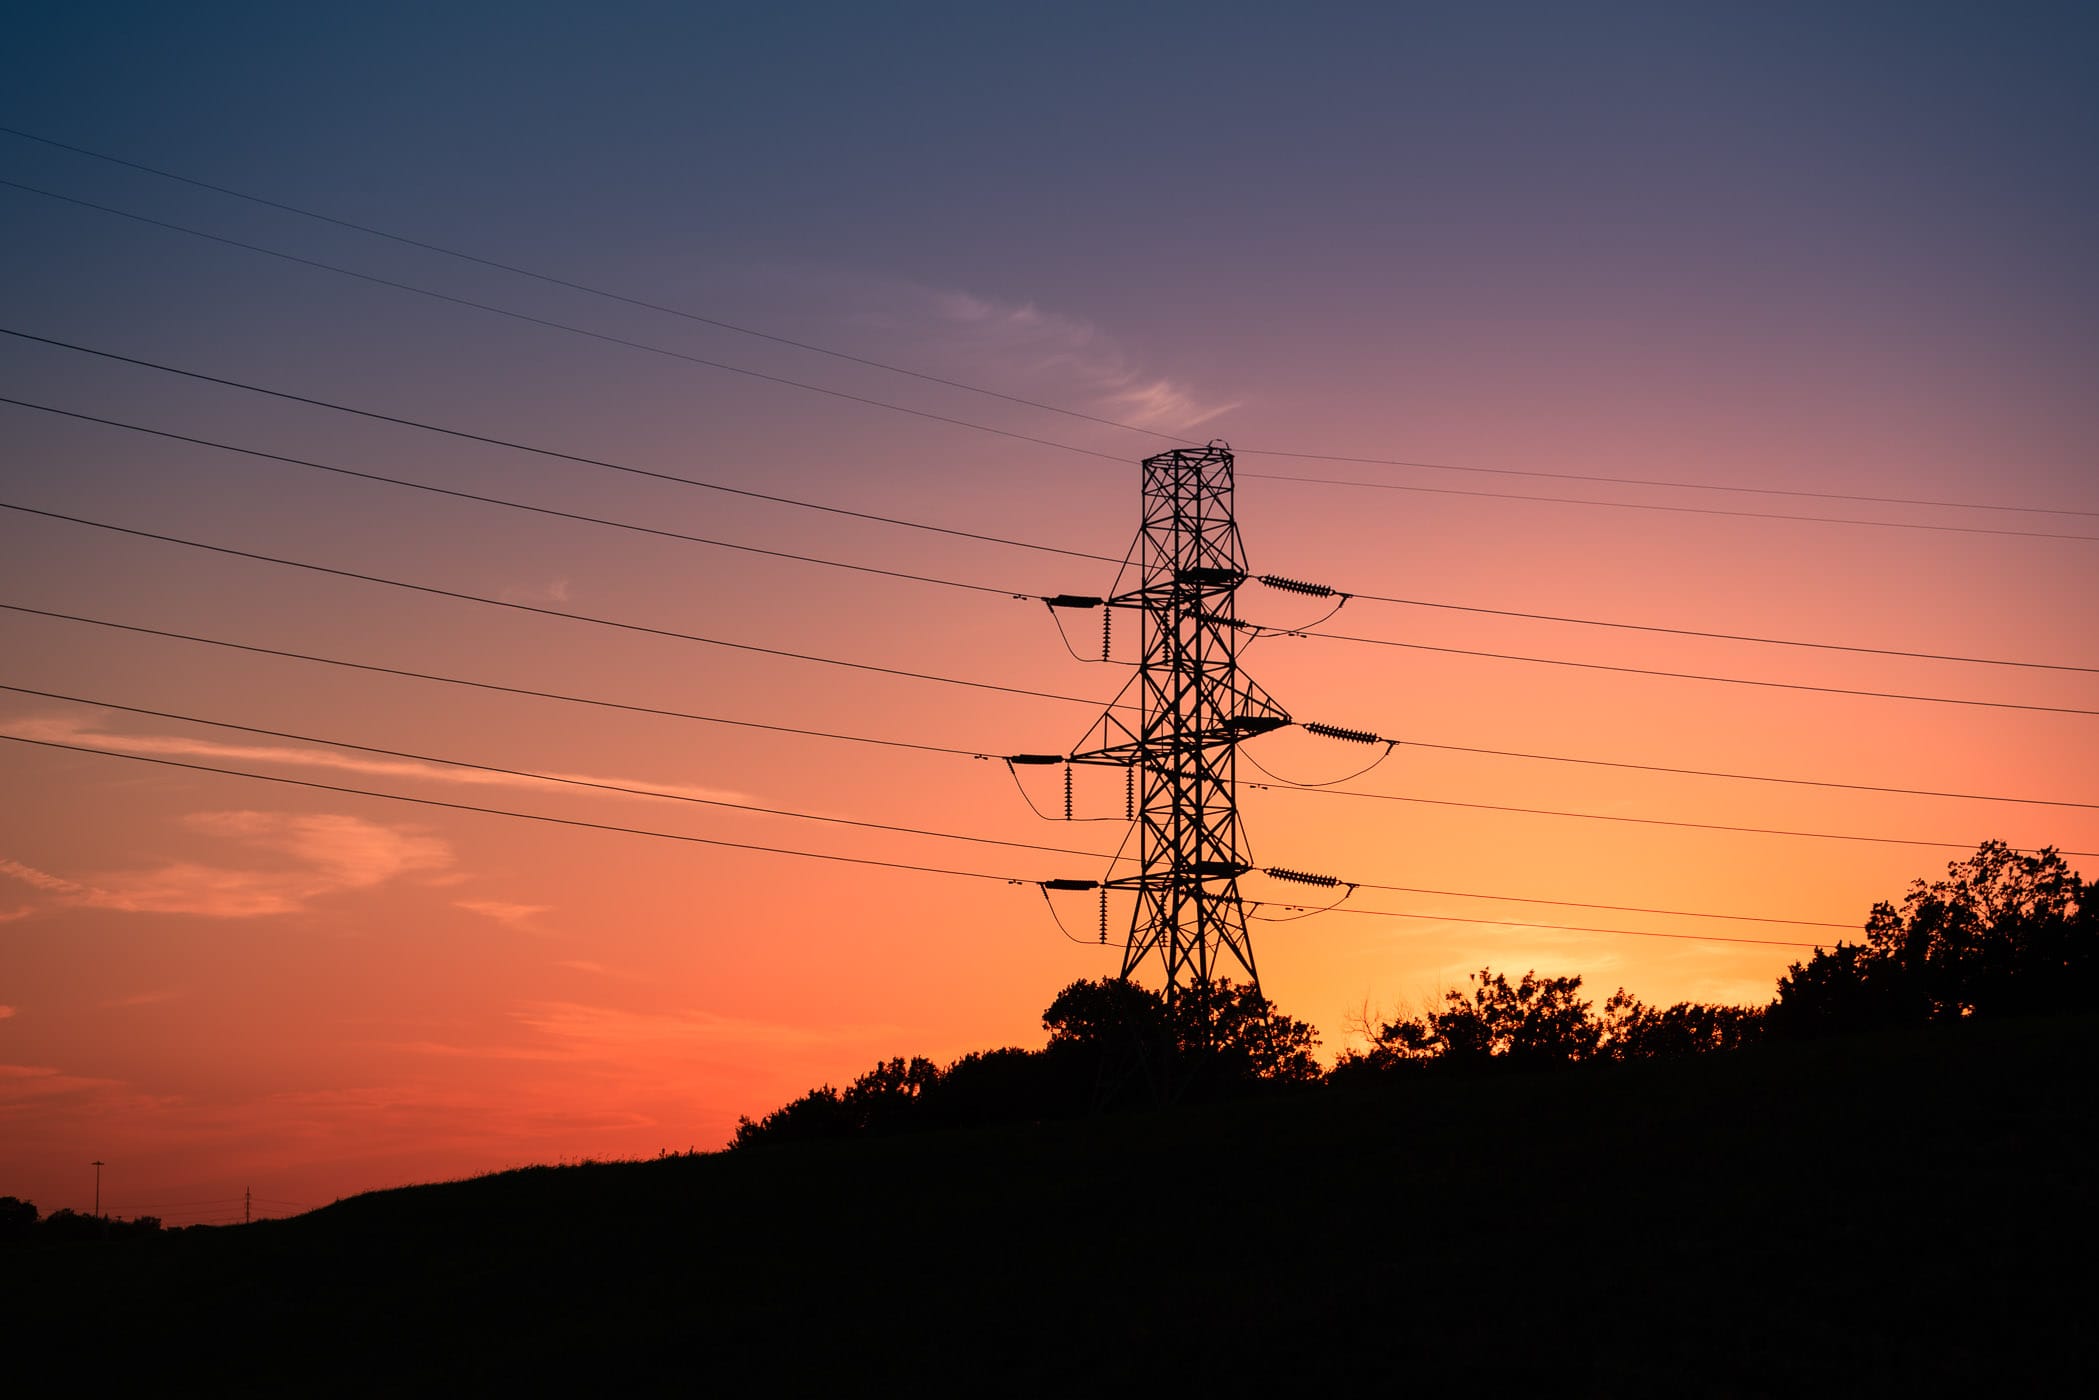 The sun sets on a electric pylon in Irving, Texas.